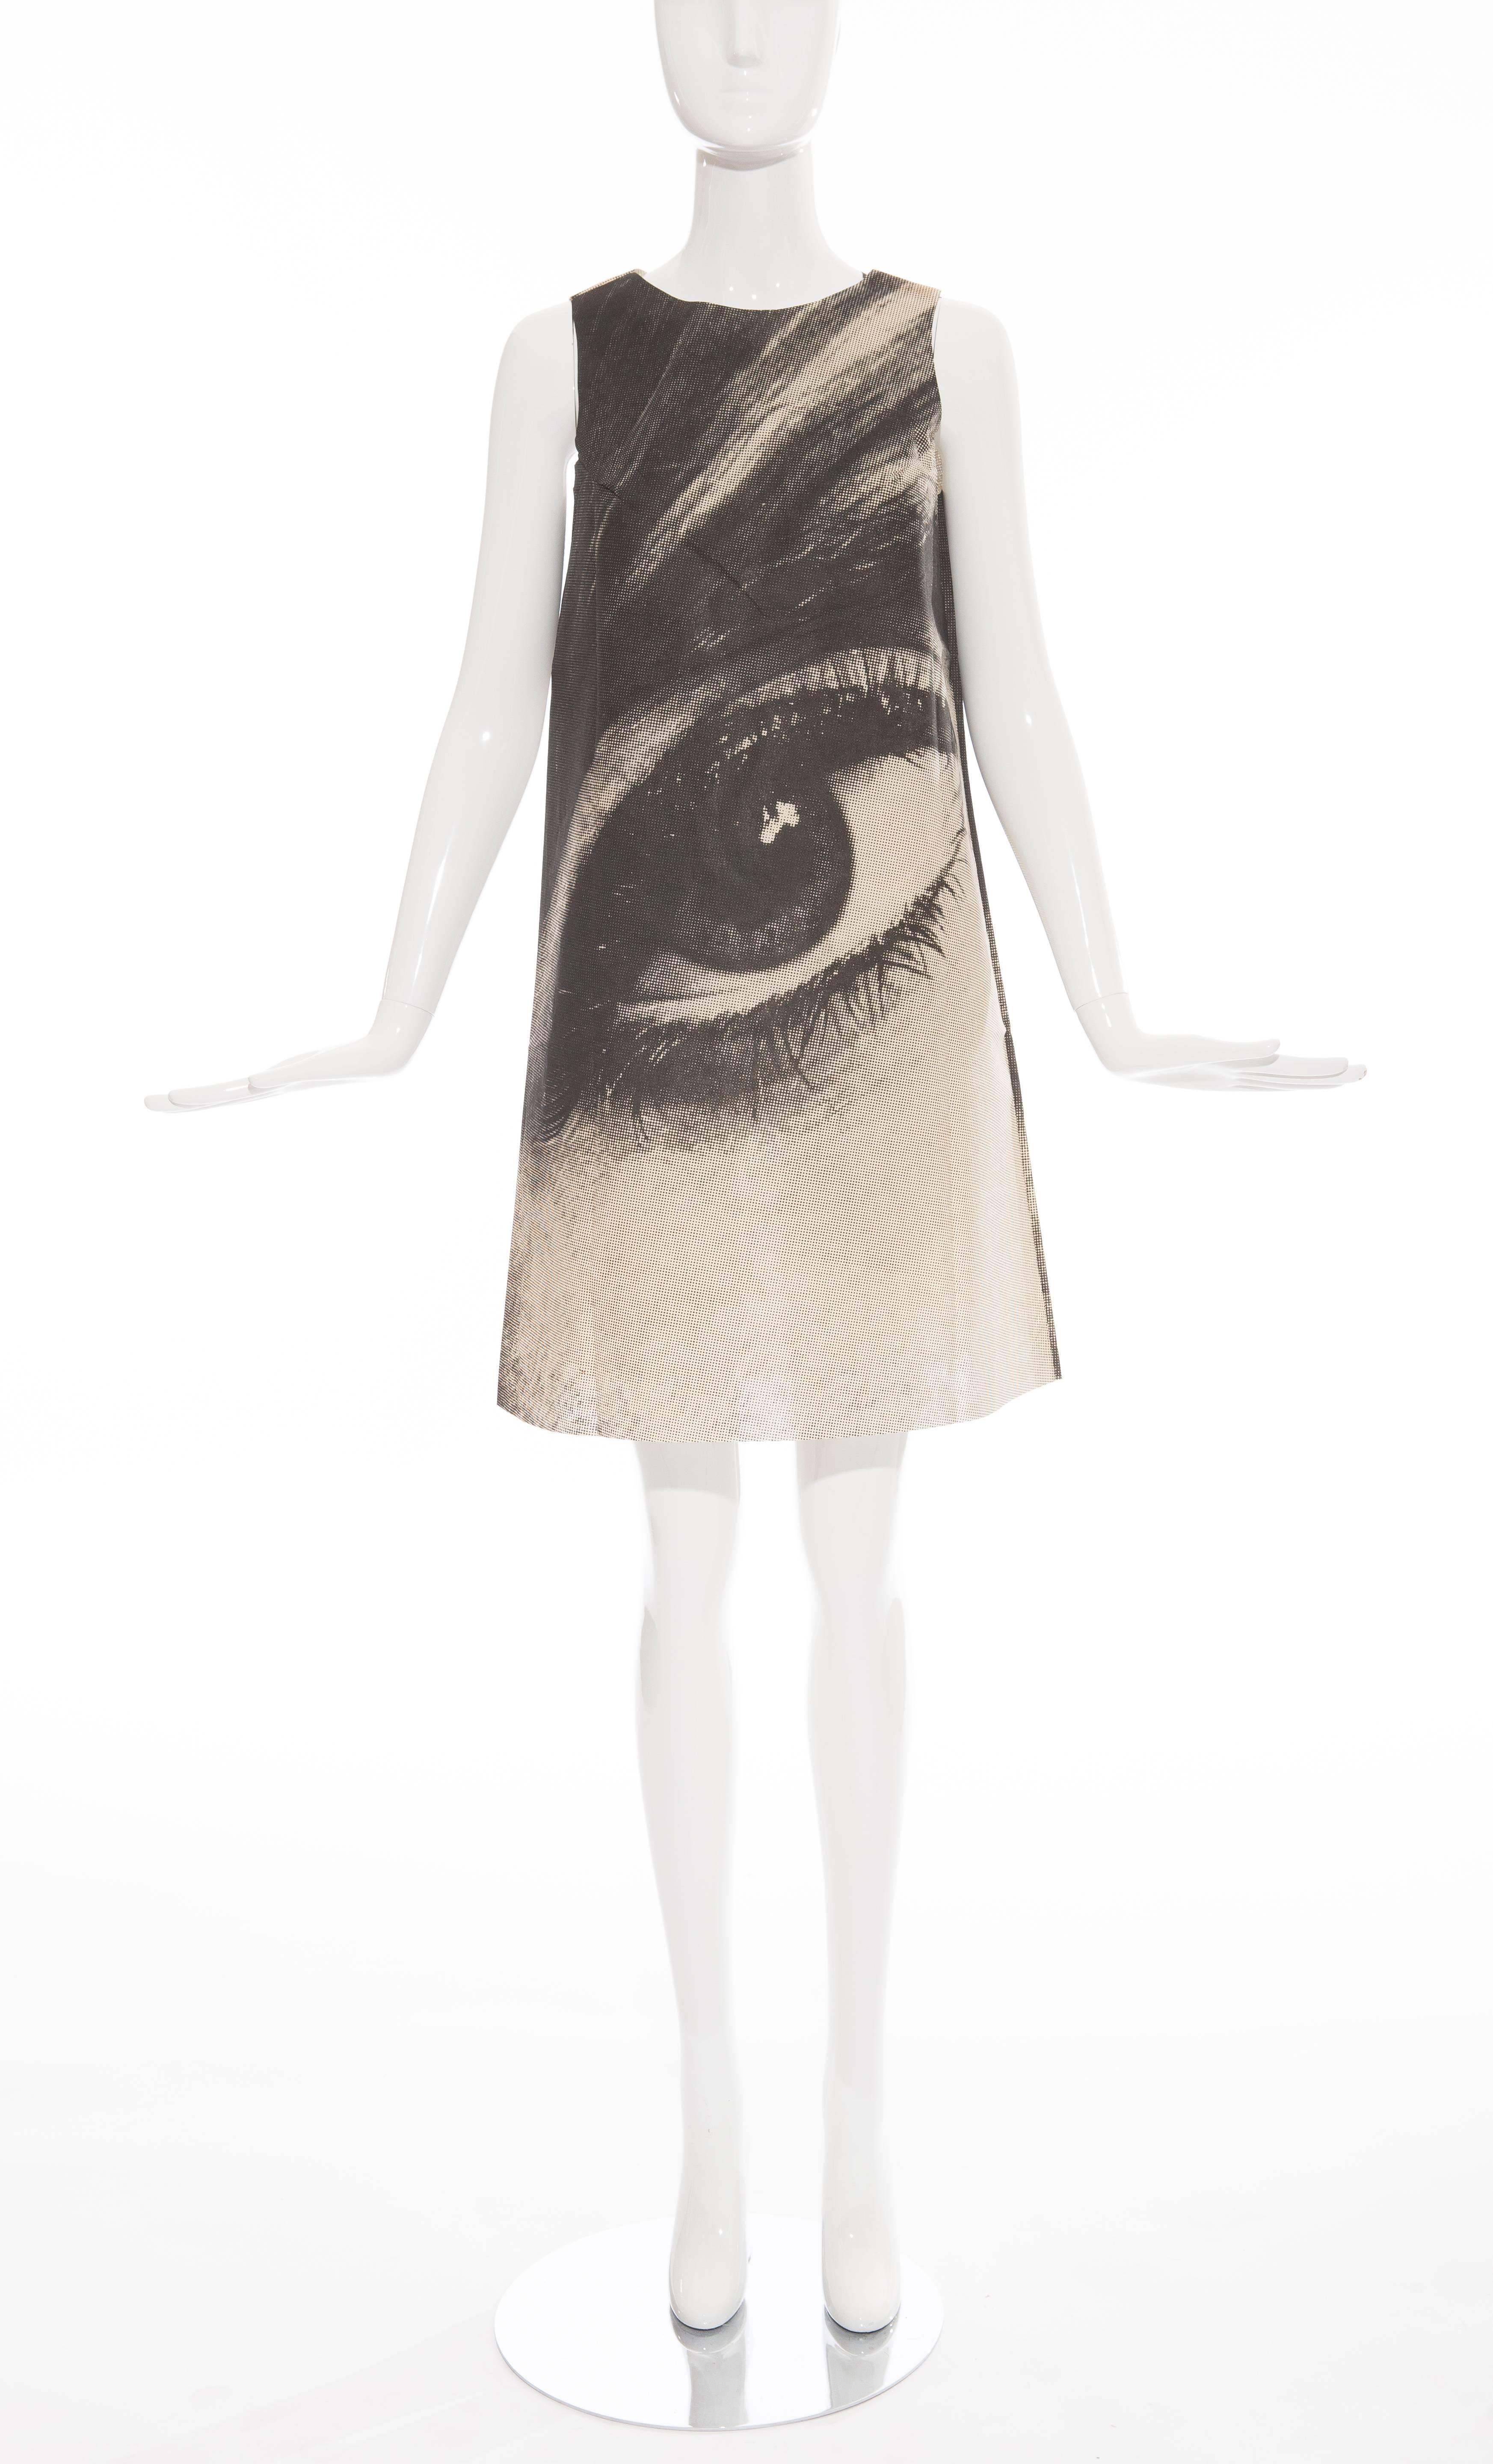 London Series Paper Dress, Circa 1960's, Mystic Eye designed by graphic artist Harry Gordon with original packaging